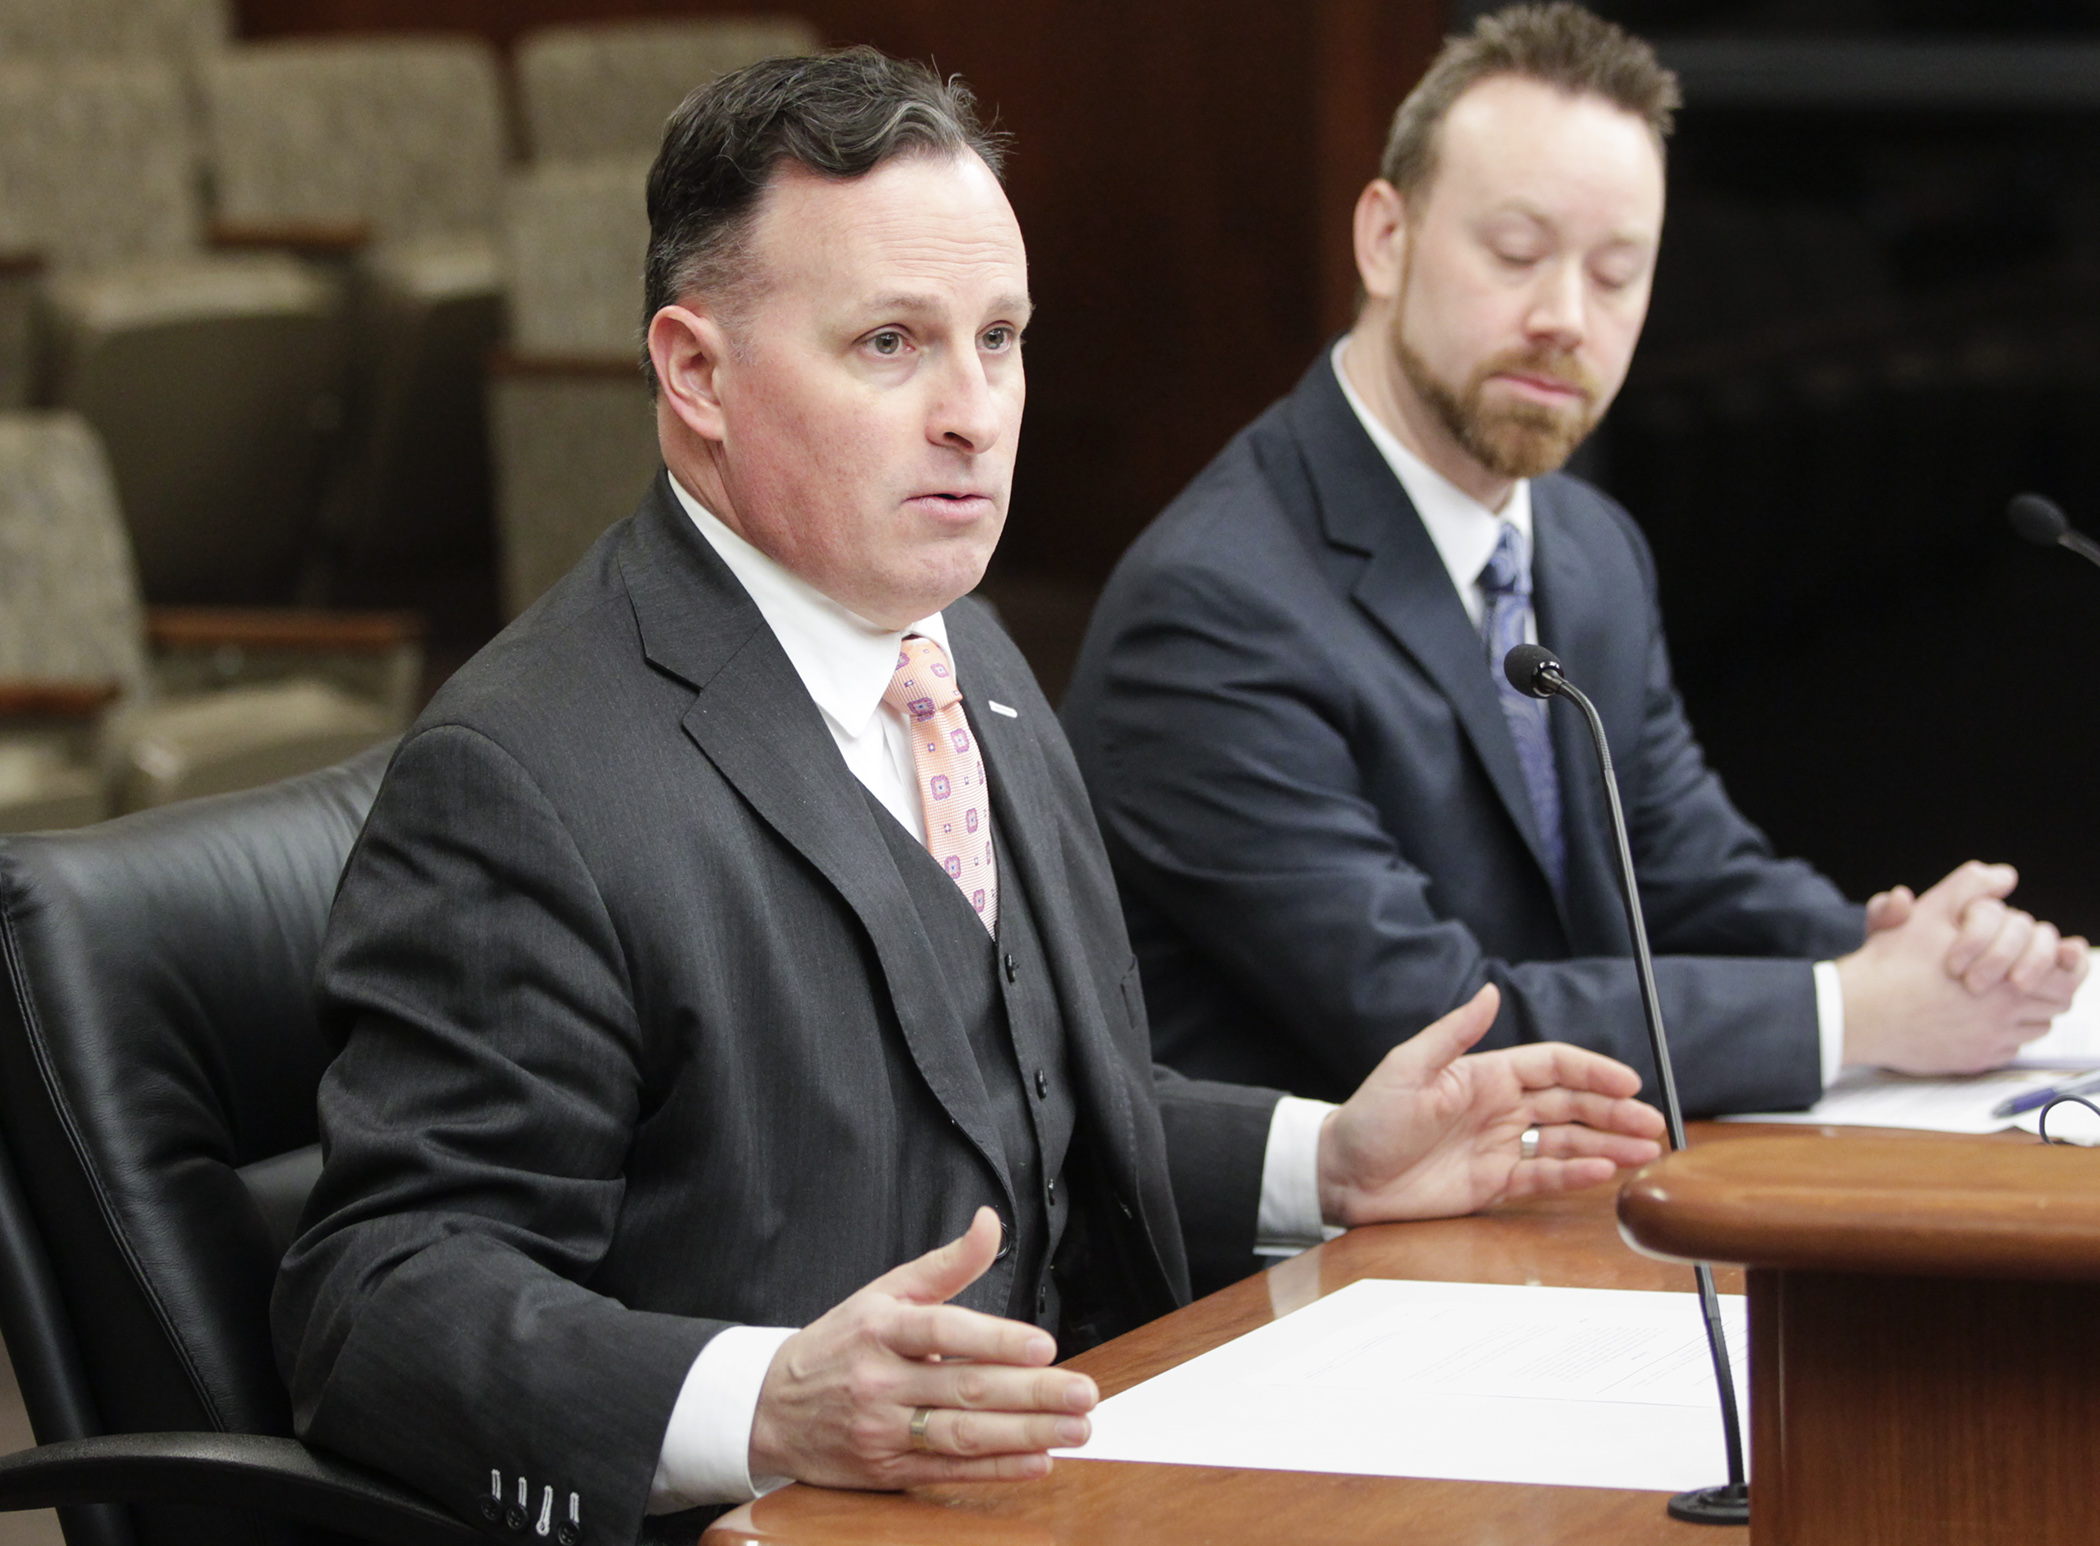 Rep. John Lesch describes to the House Judiciary Finance and Civil Law Division provisions of a bill he intends to introduce regarding the use of electronic device tracking warrants. Photo by Paul Battaglia